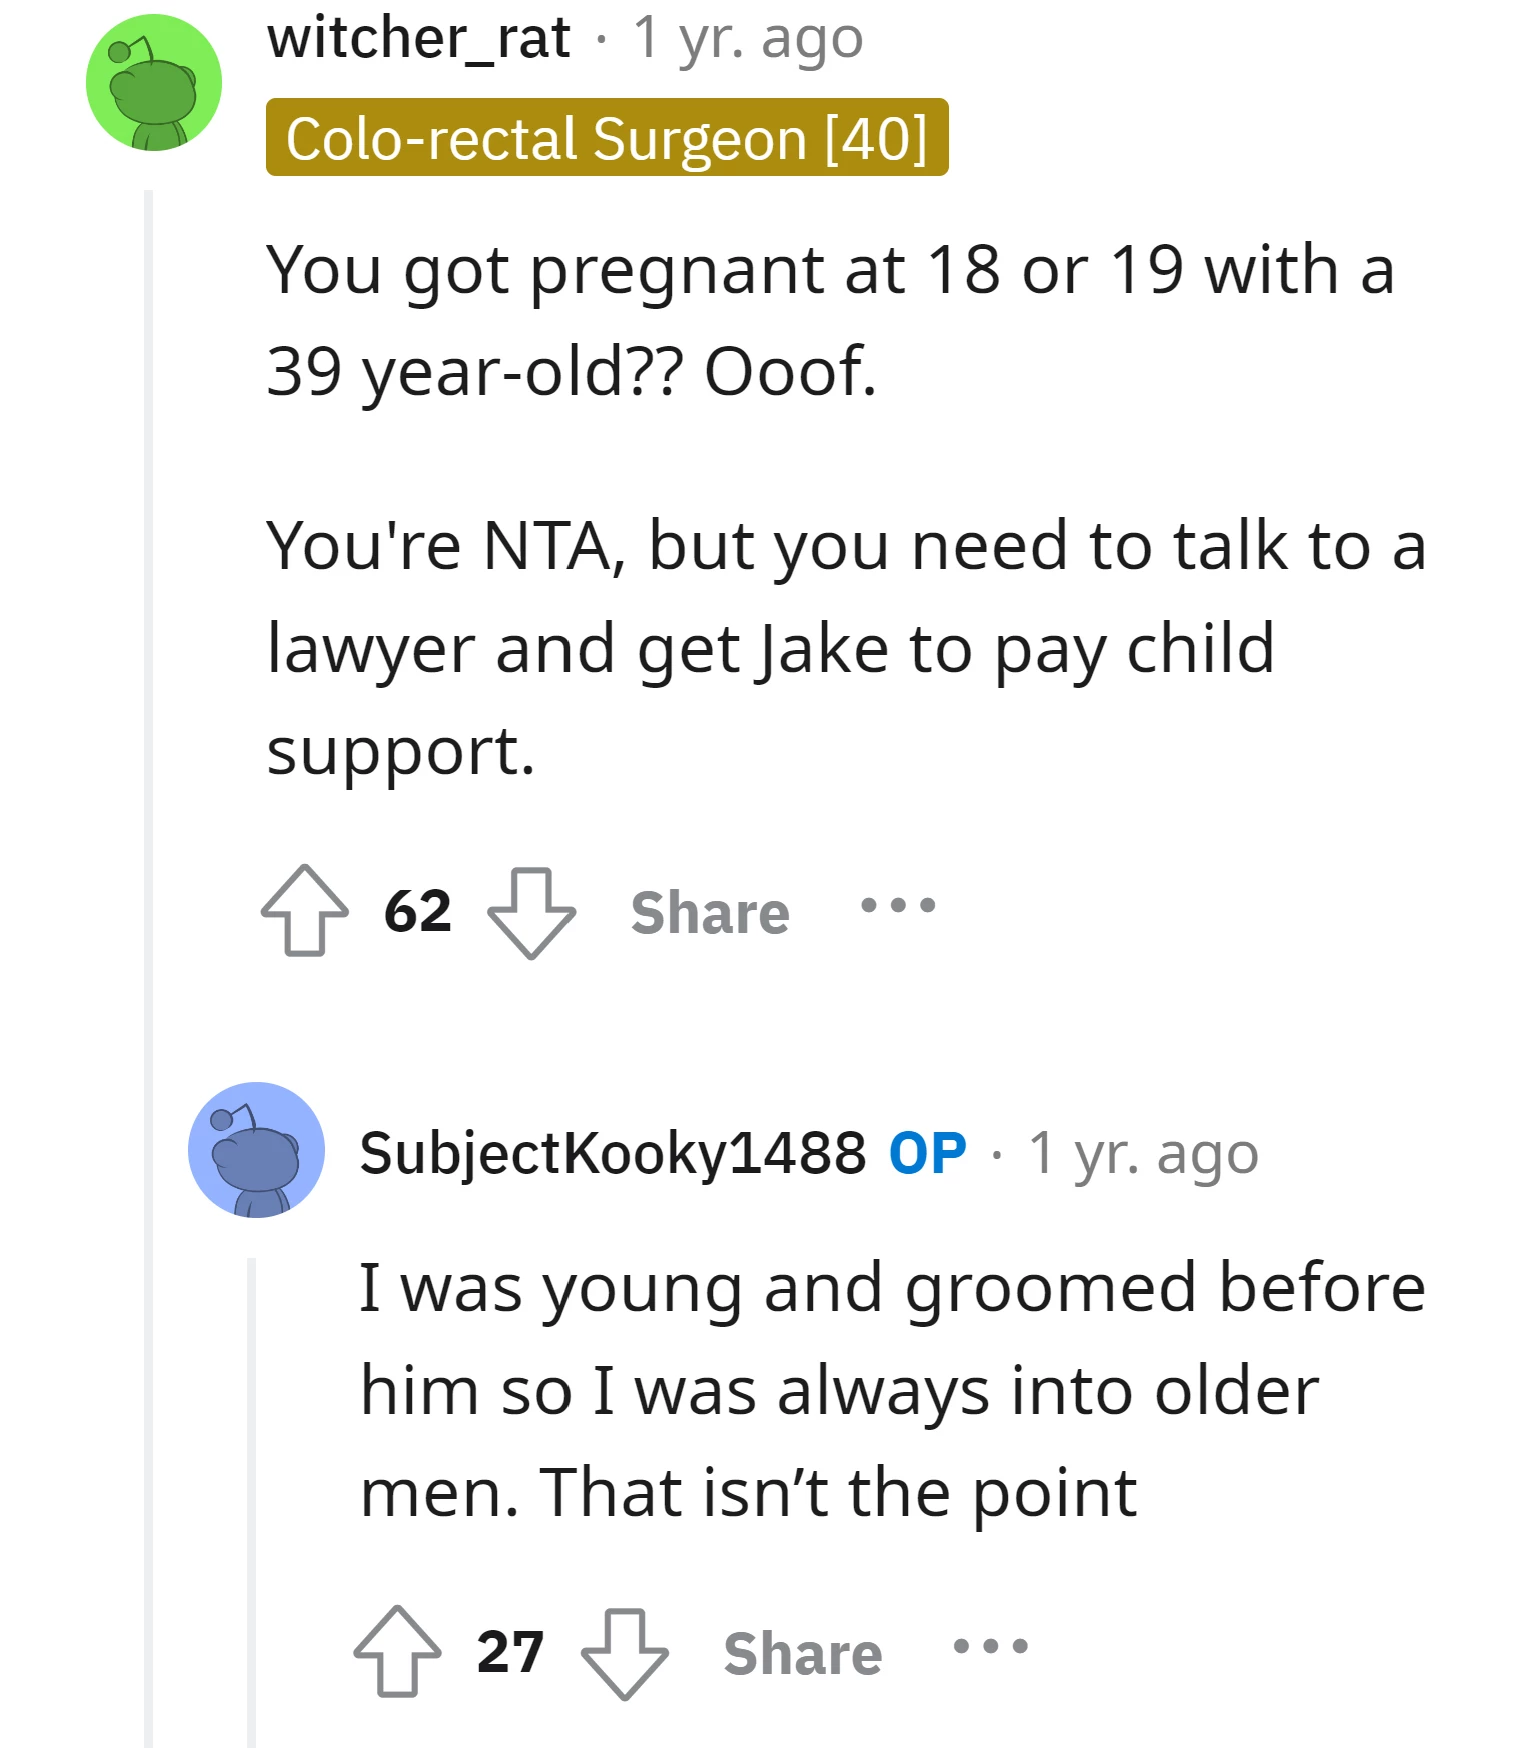 OP was young and what?